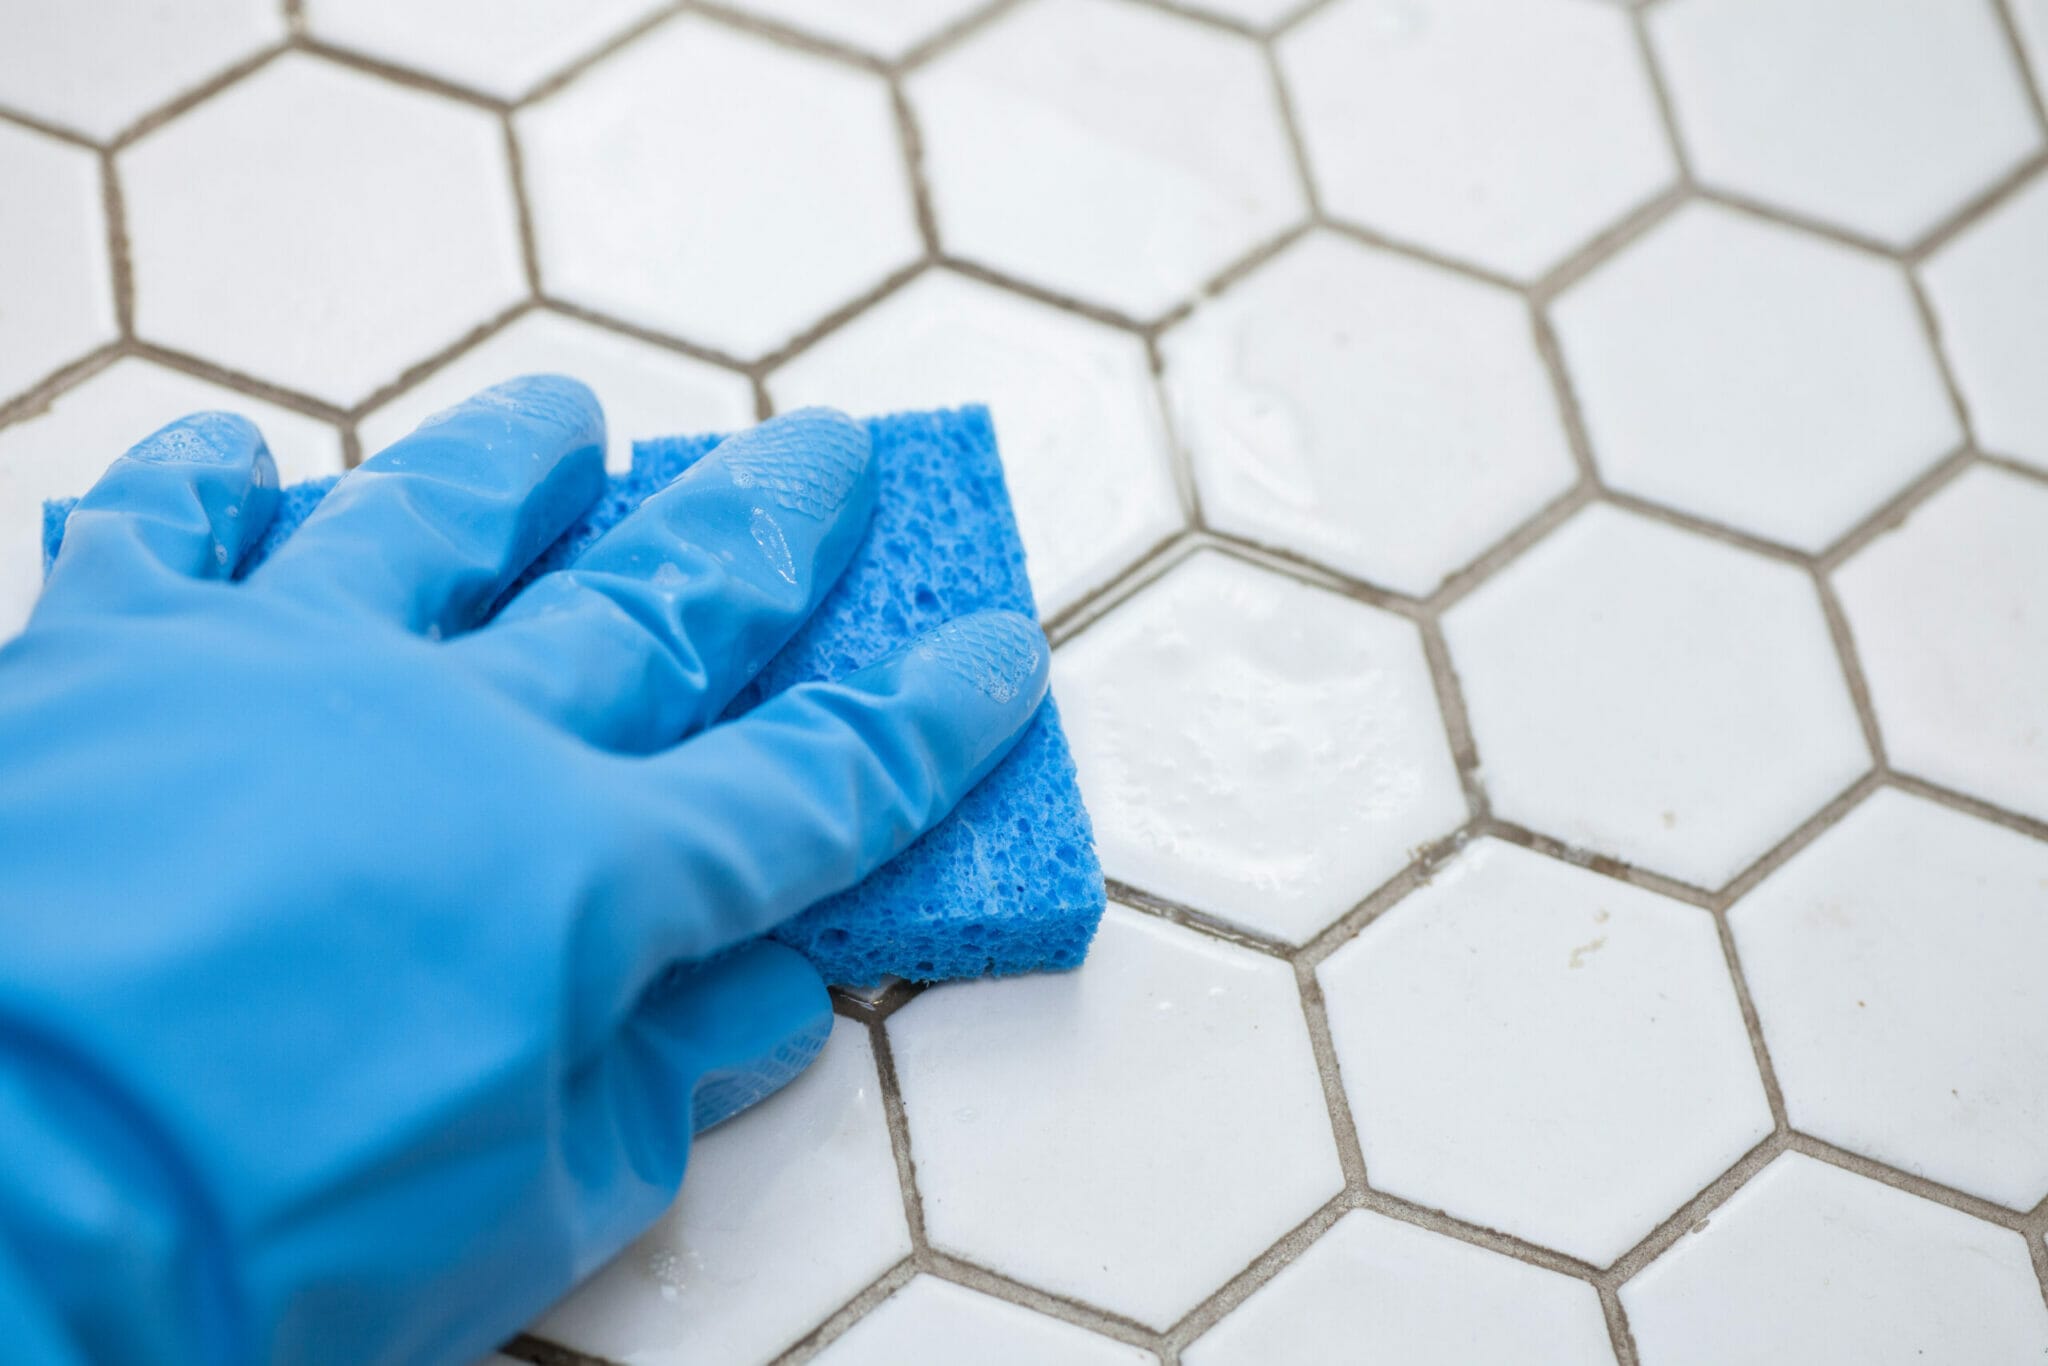 How to clean dog urine from tile grout